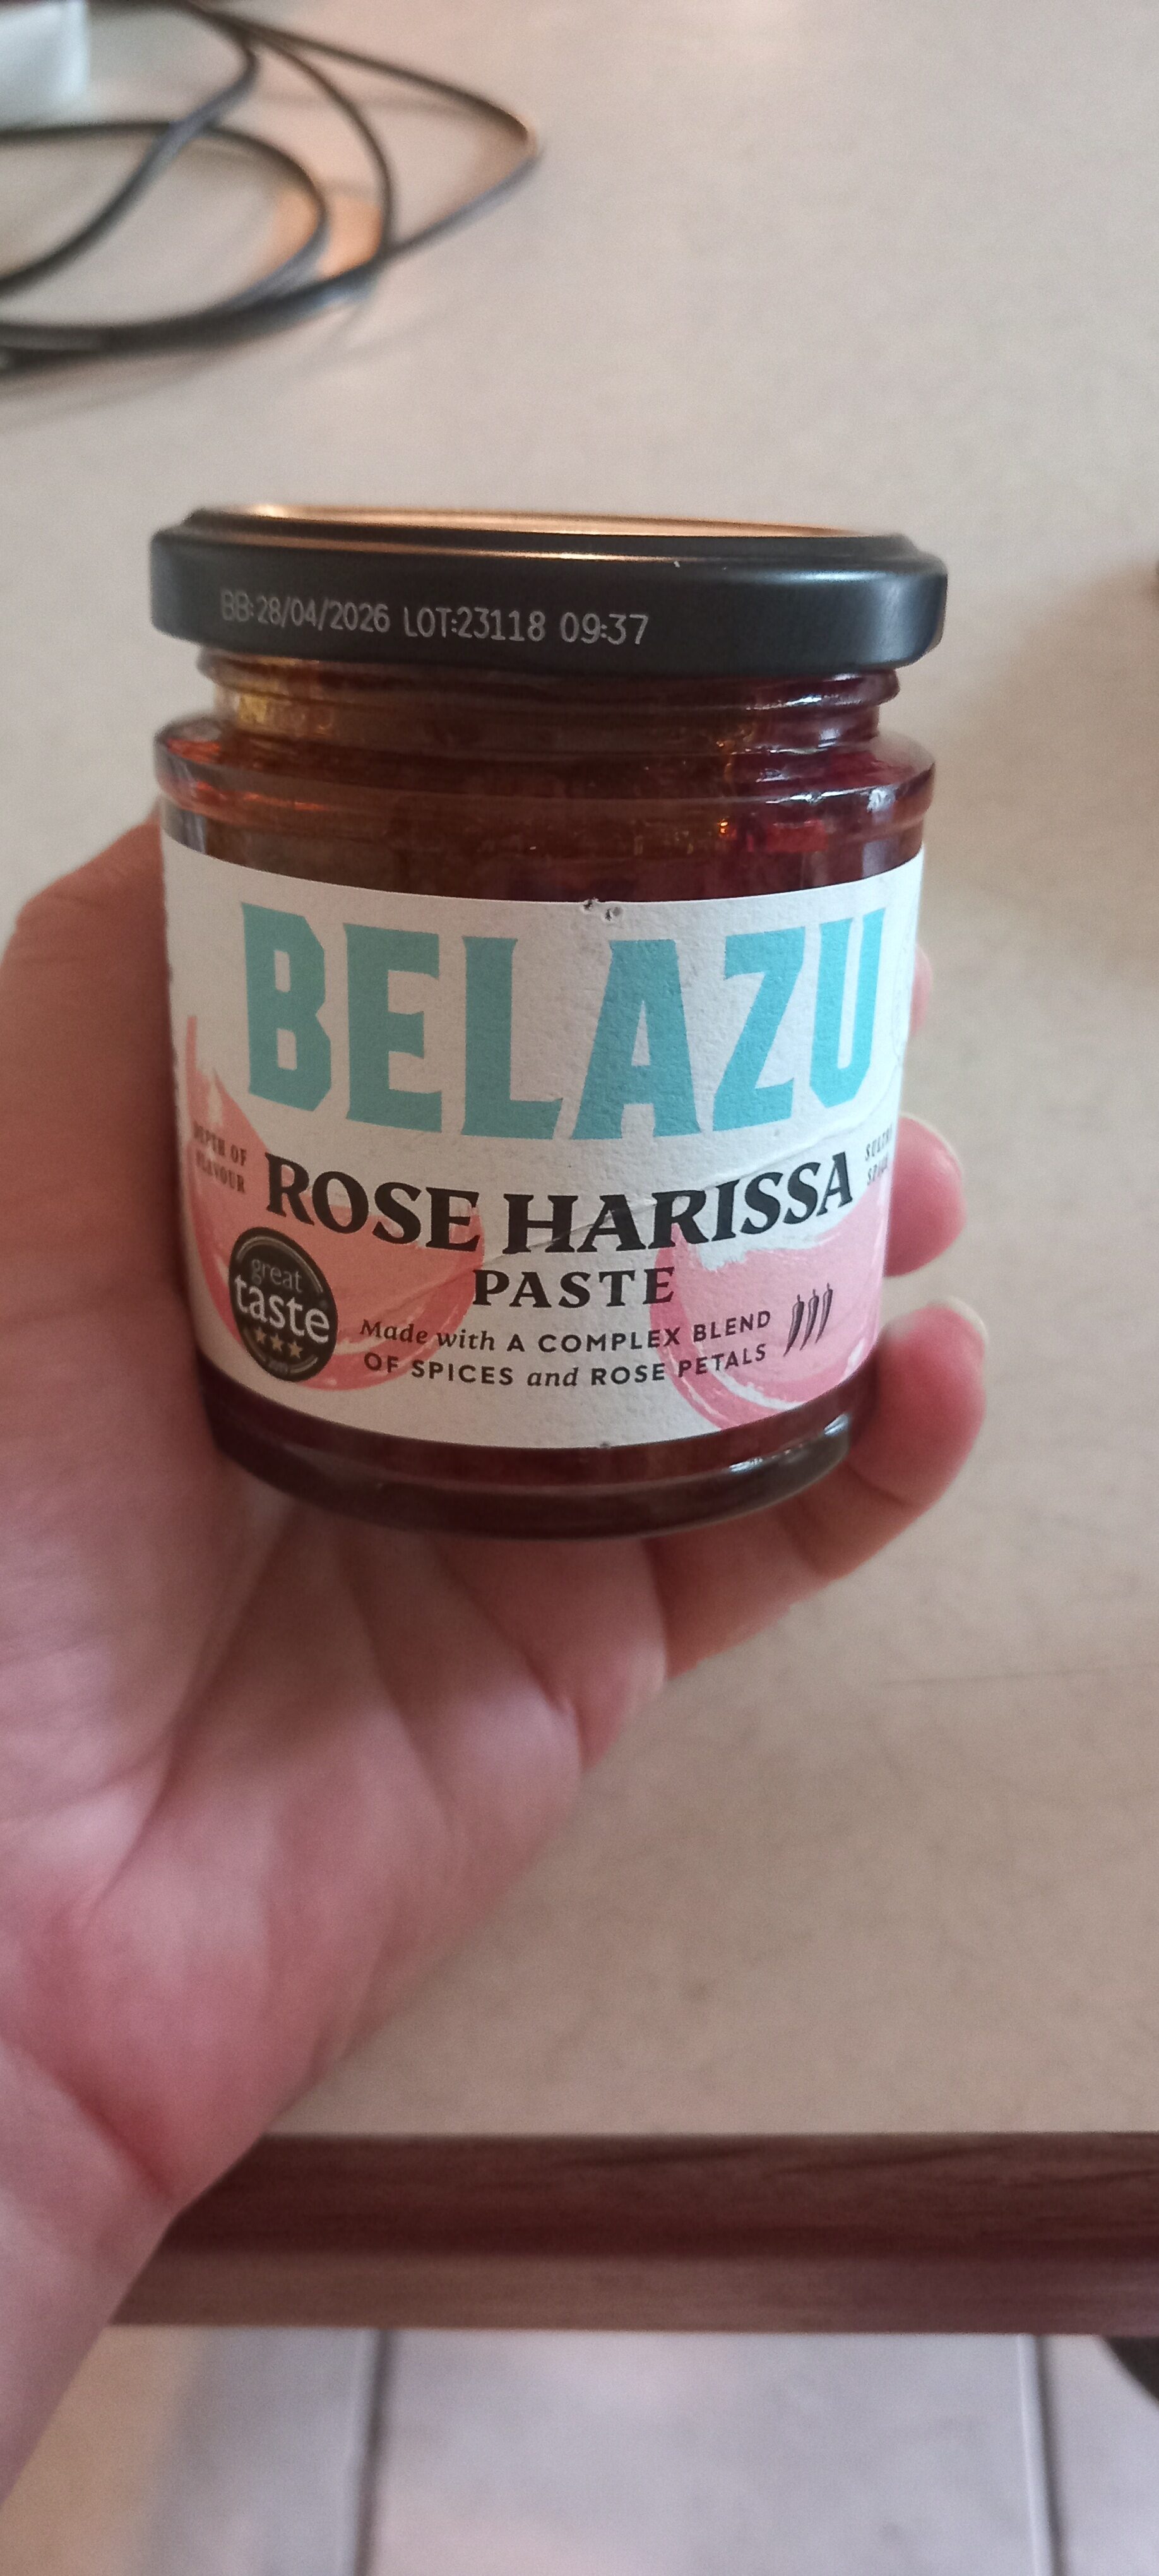 Rose Harissa Paste - Recycling instructions and/or packaging information